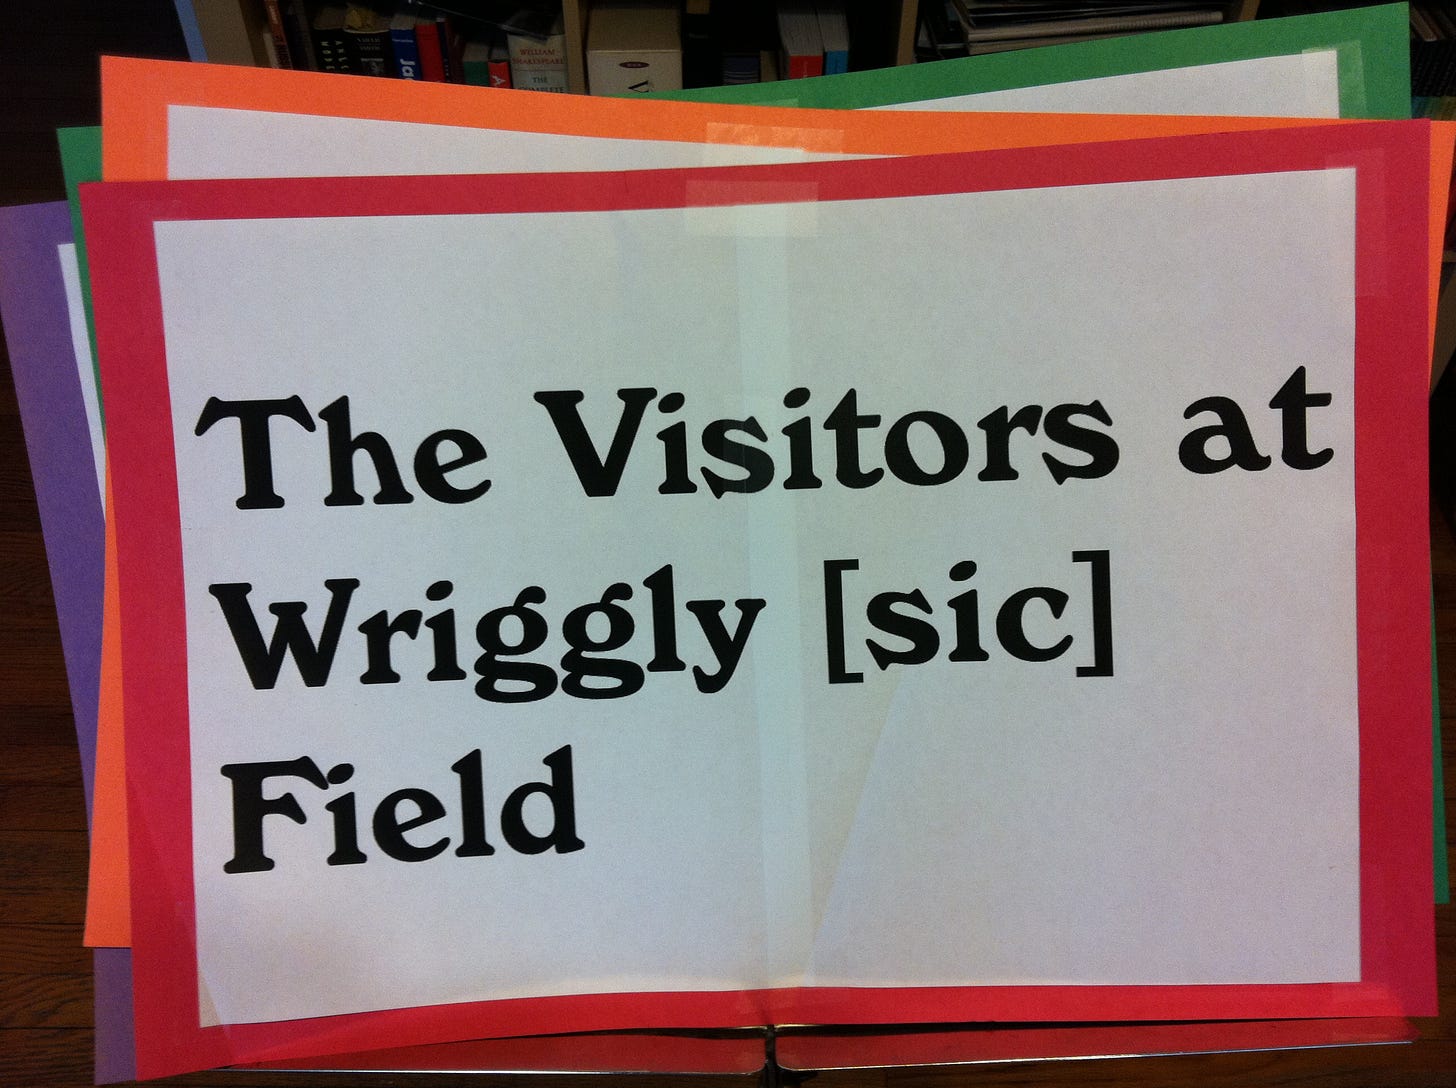 A sign mounted on red construction paper reads: "The Visitors at Wriggly [sic] Field"